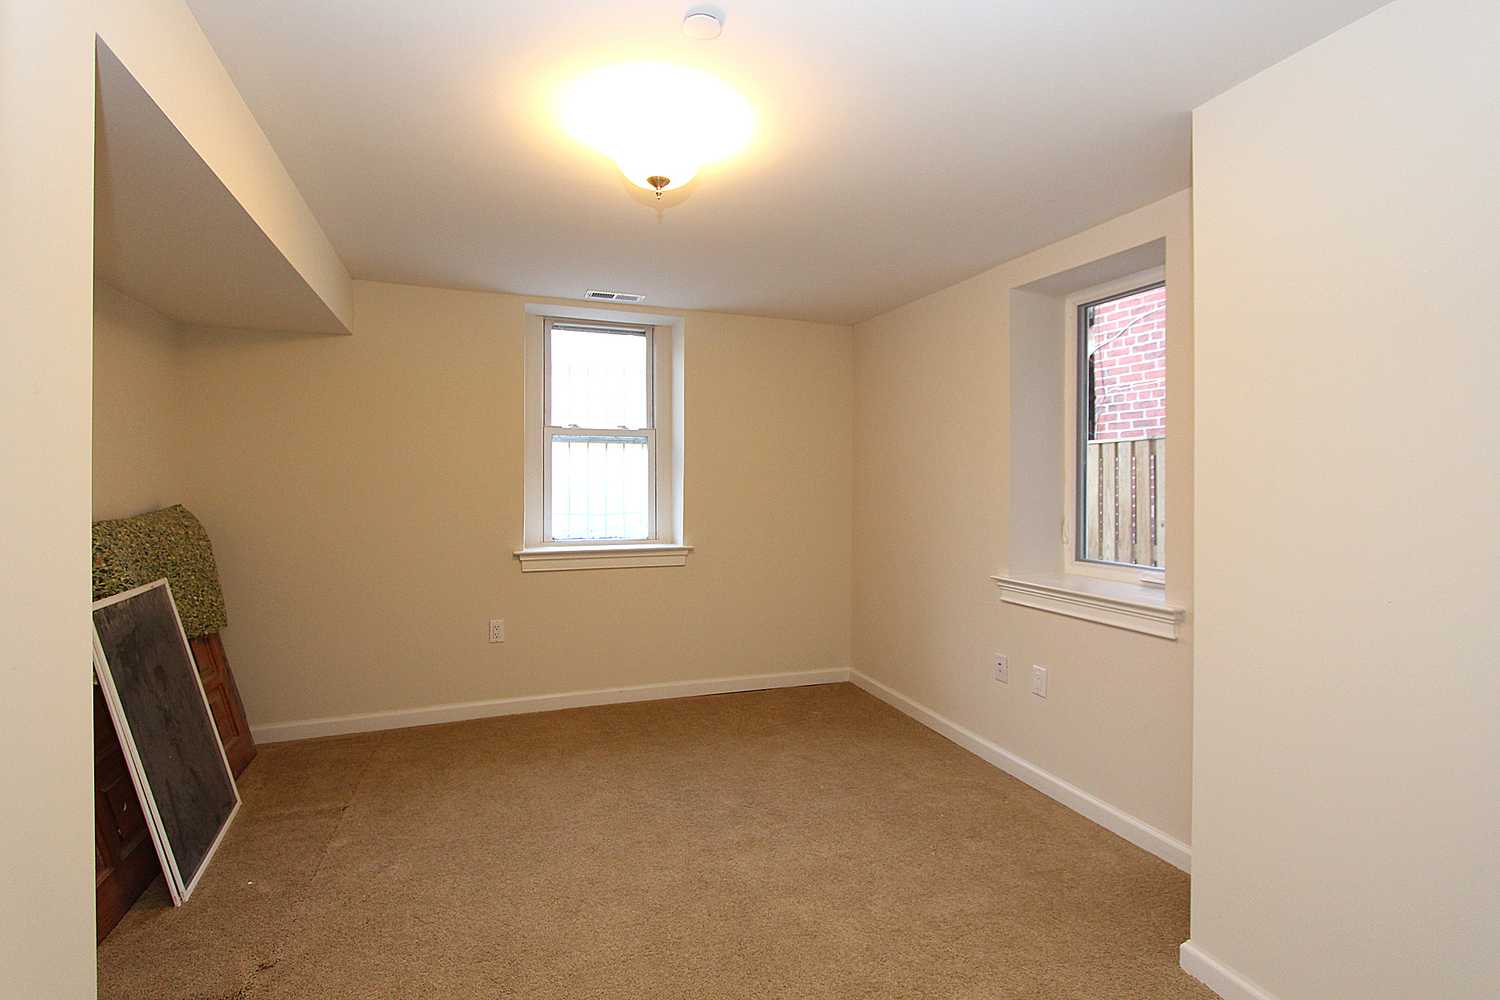 Total Rehab of a Rowhome in Columbia Heights